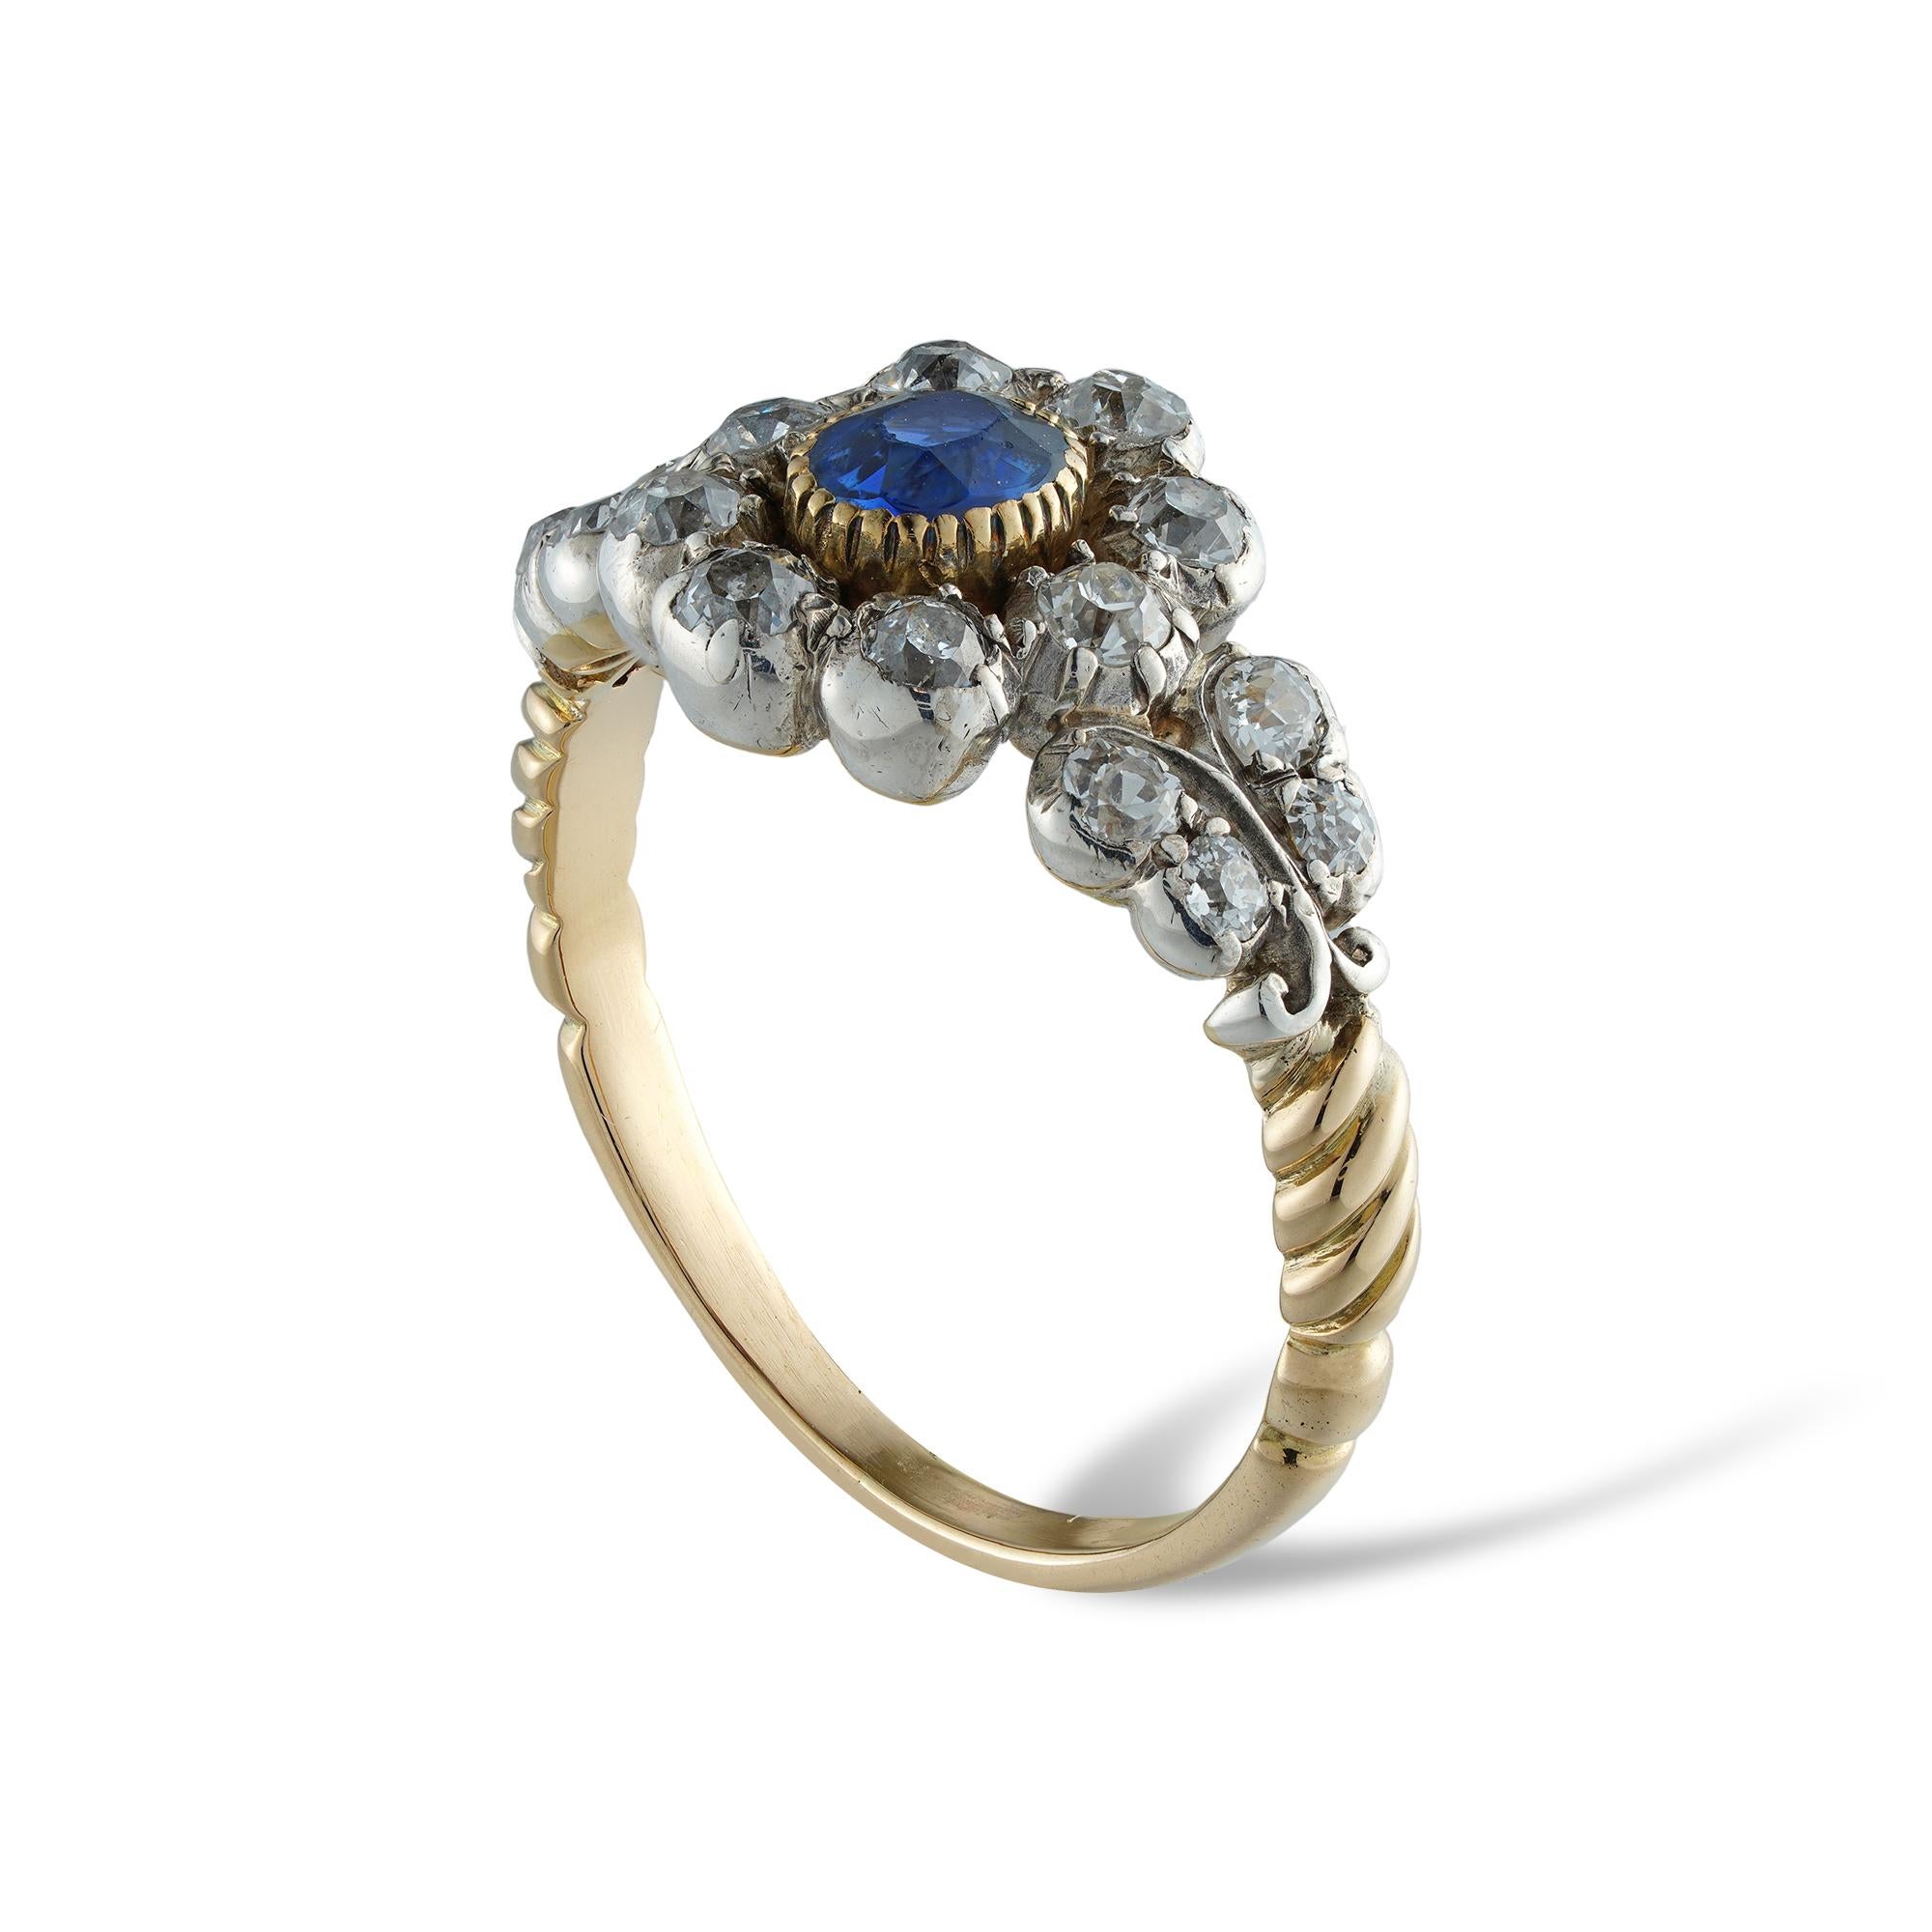 A Victorian sapphire and diamond ring, to the centre an oval-cut sapphire estimated to weigh 0.4 carats surrounded by eight old European-cut diamonds in the form of a cluster, each shoulder set with four old-cut diamonds, the diamonds estimated to